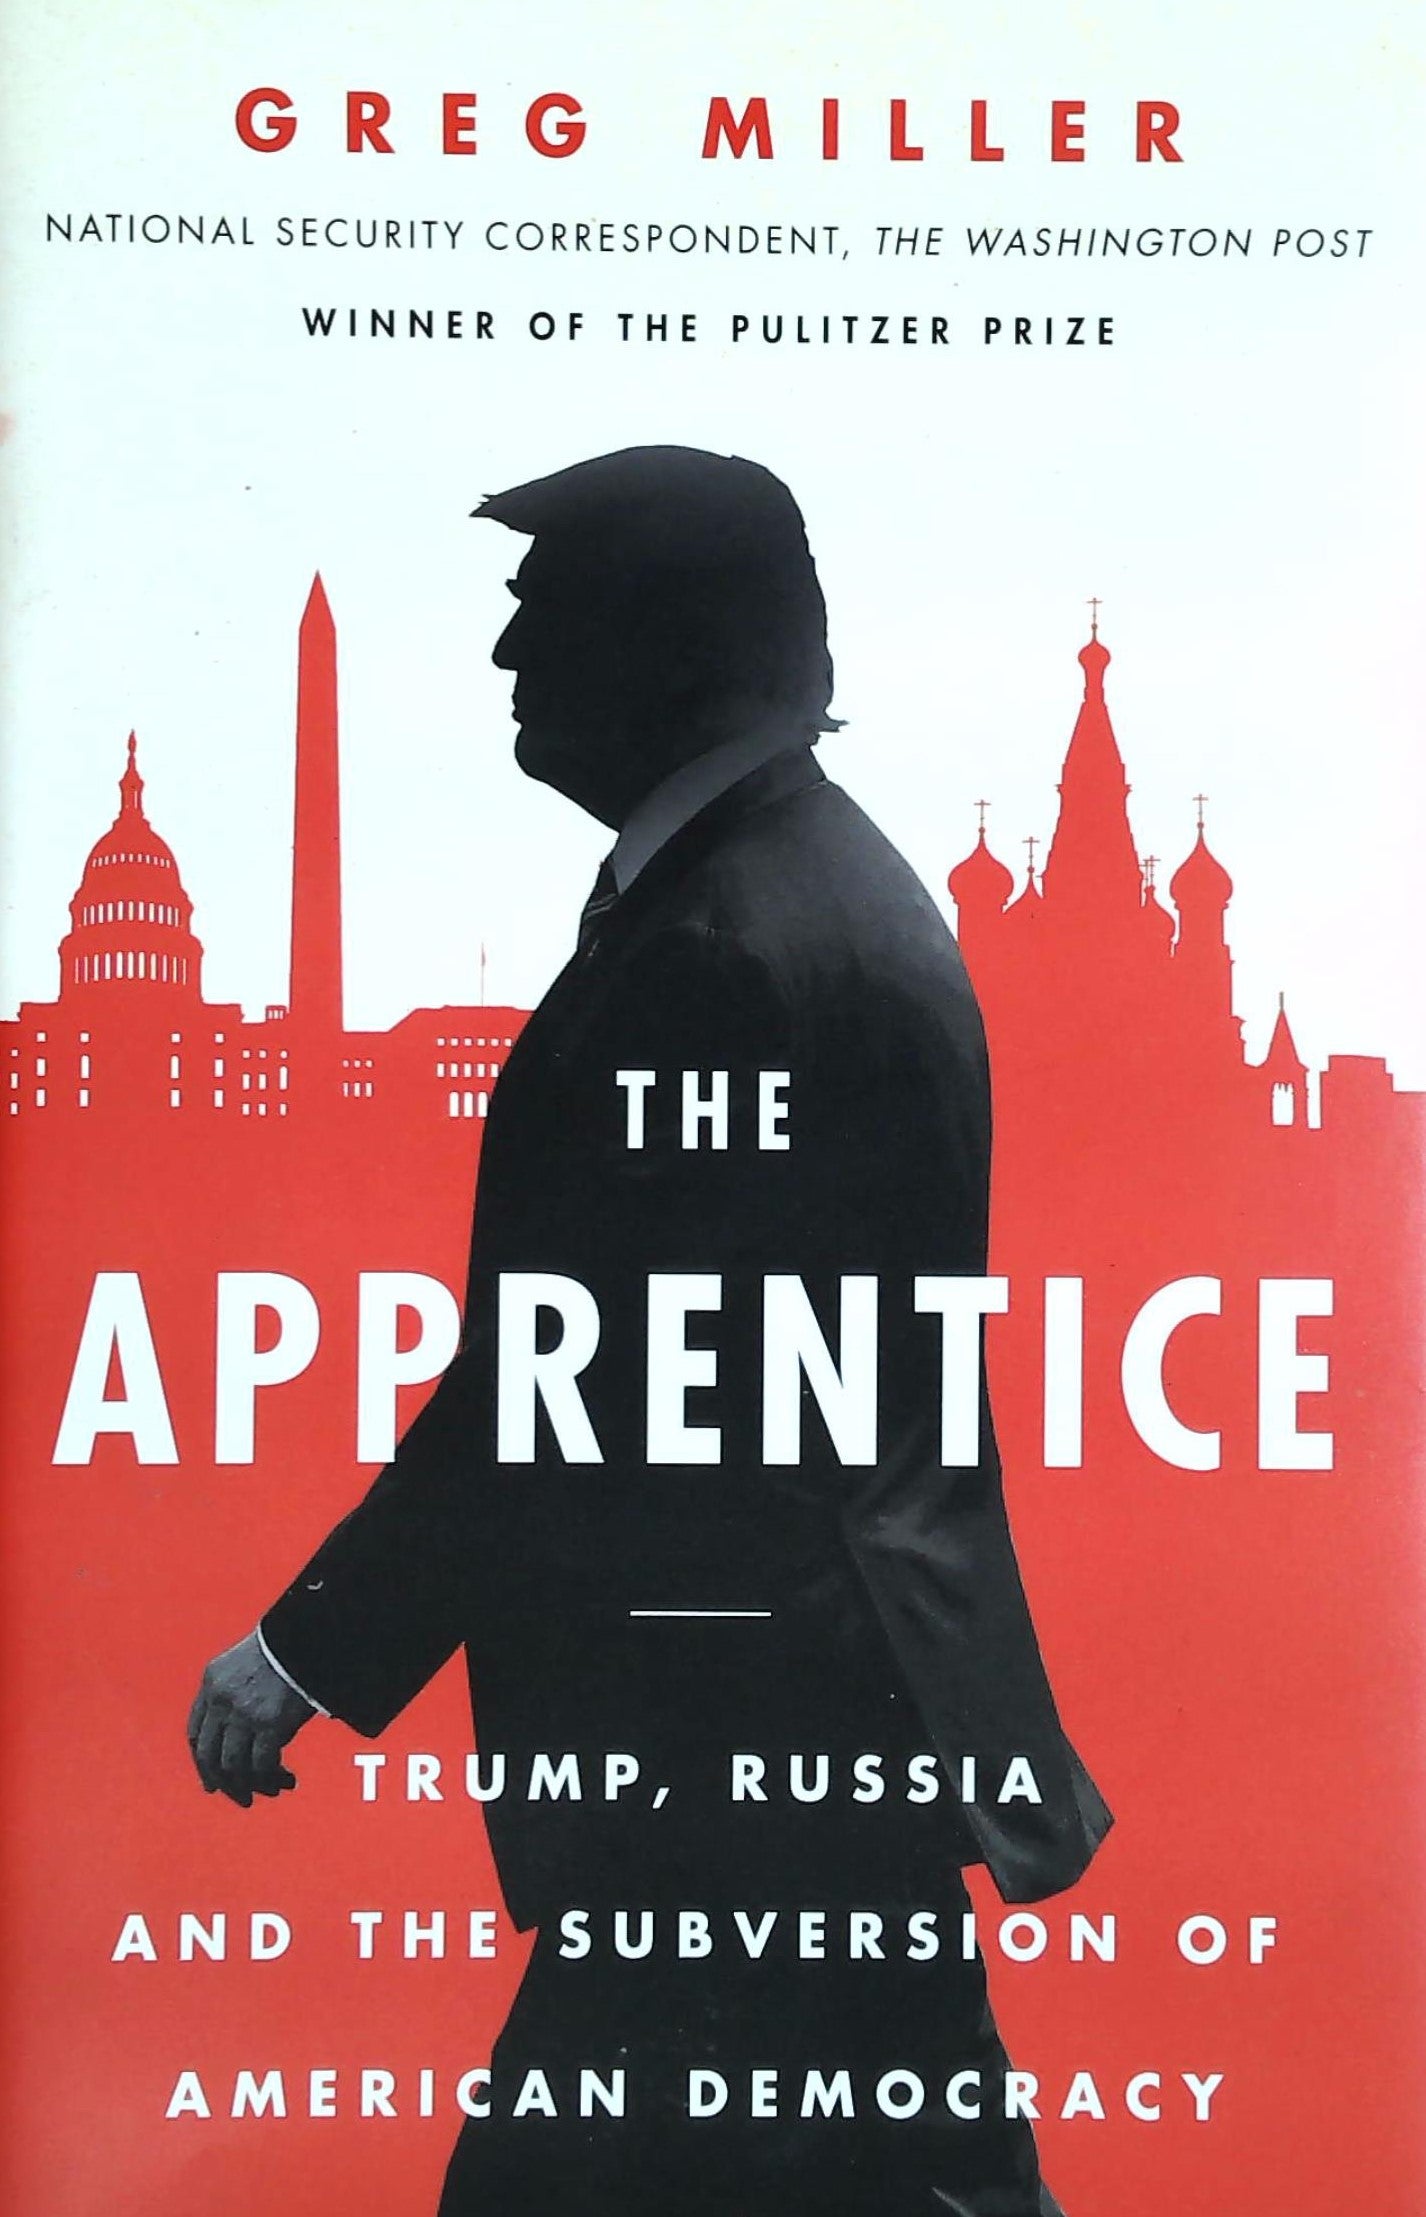 Livre ISBN 0062803700 The Apprentice : Trump, Russia and ther Subversion of Americain Democracy (Greg Miller)